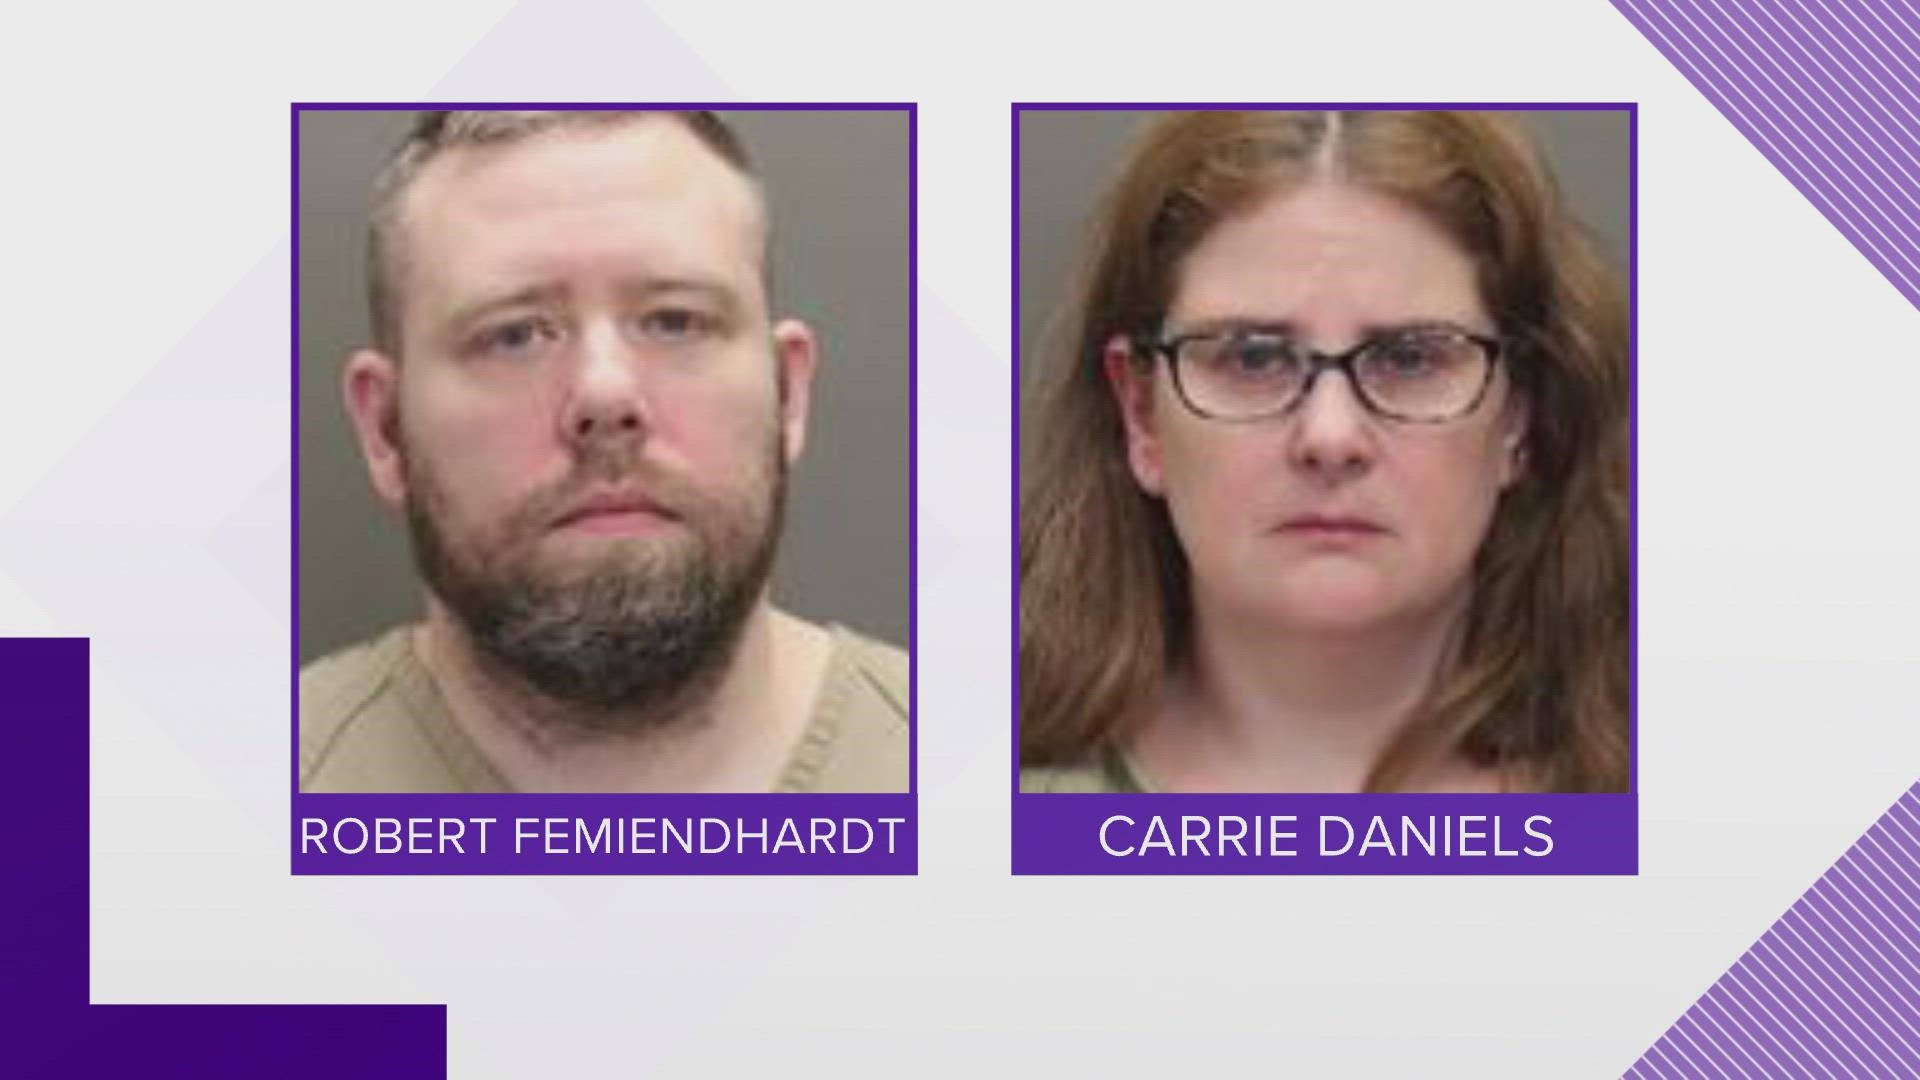 Gemienhardt and Daniels were originally arrested on local charges in early March 2022.